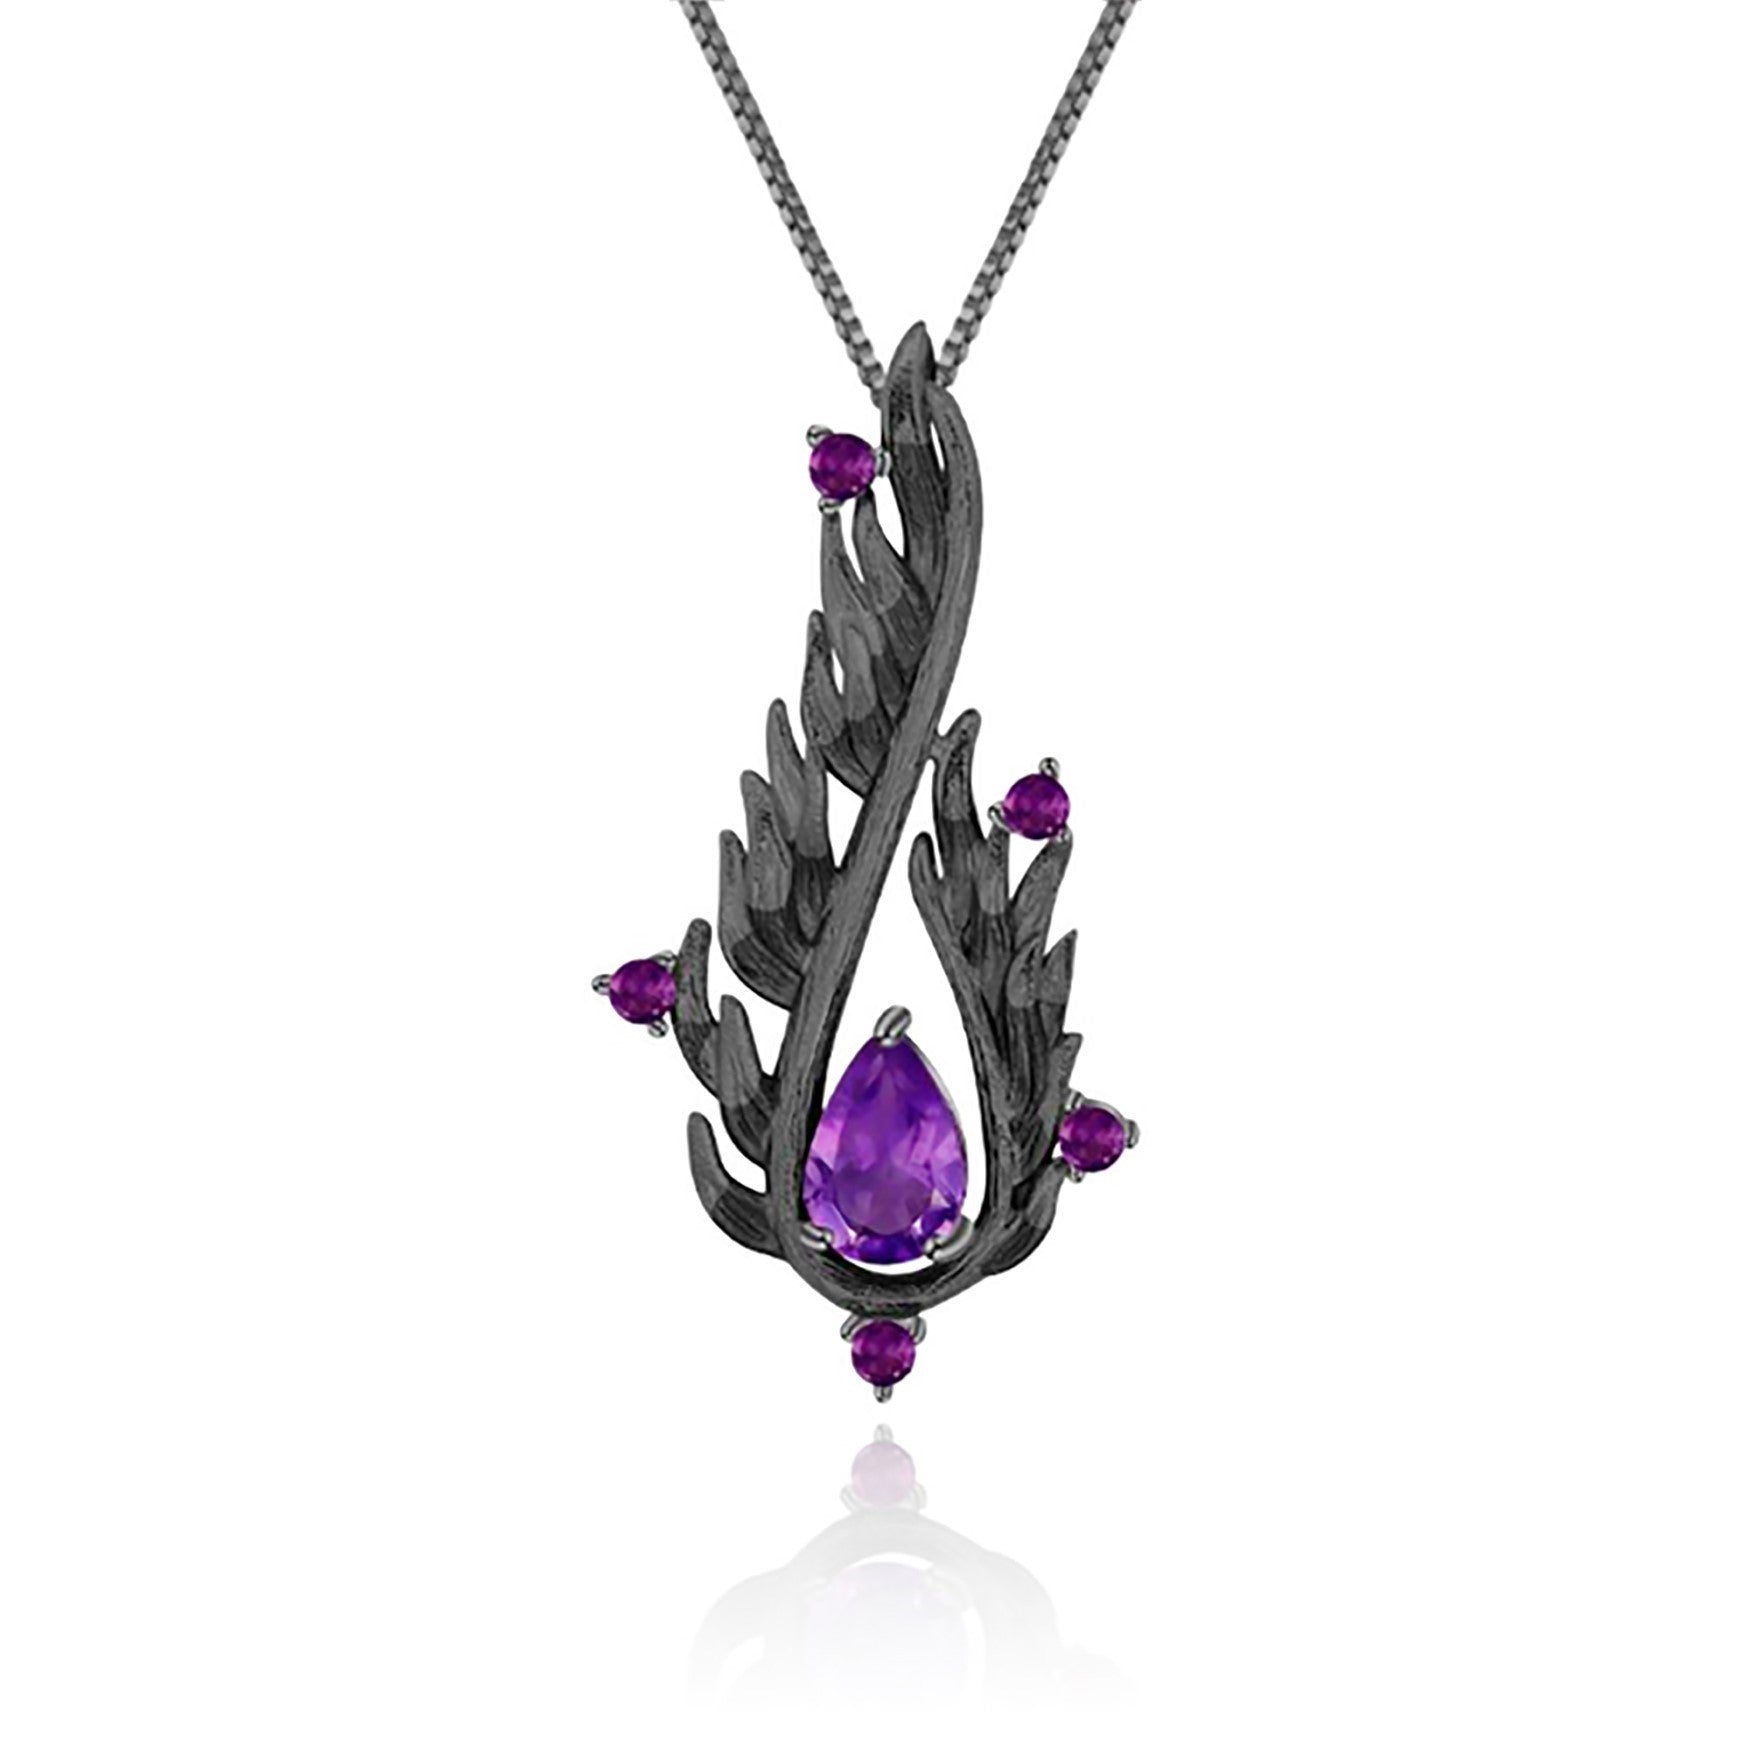 An oxidised sterling silver teardrop shaped necklace with purple amethyst stones.